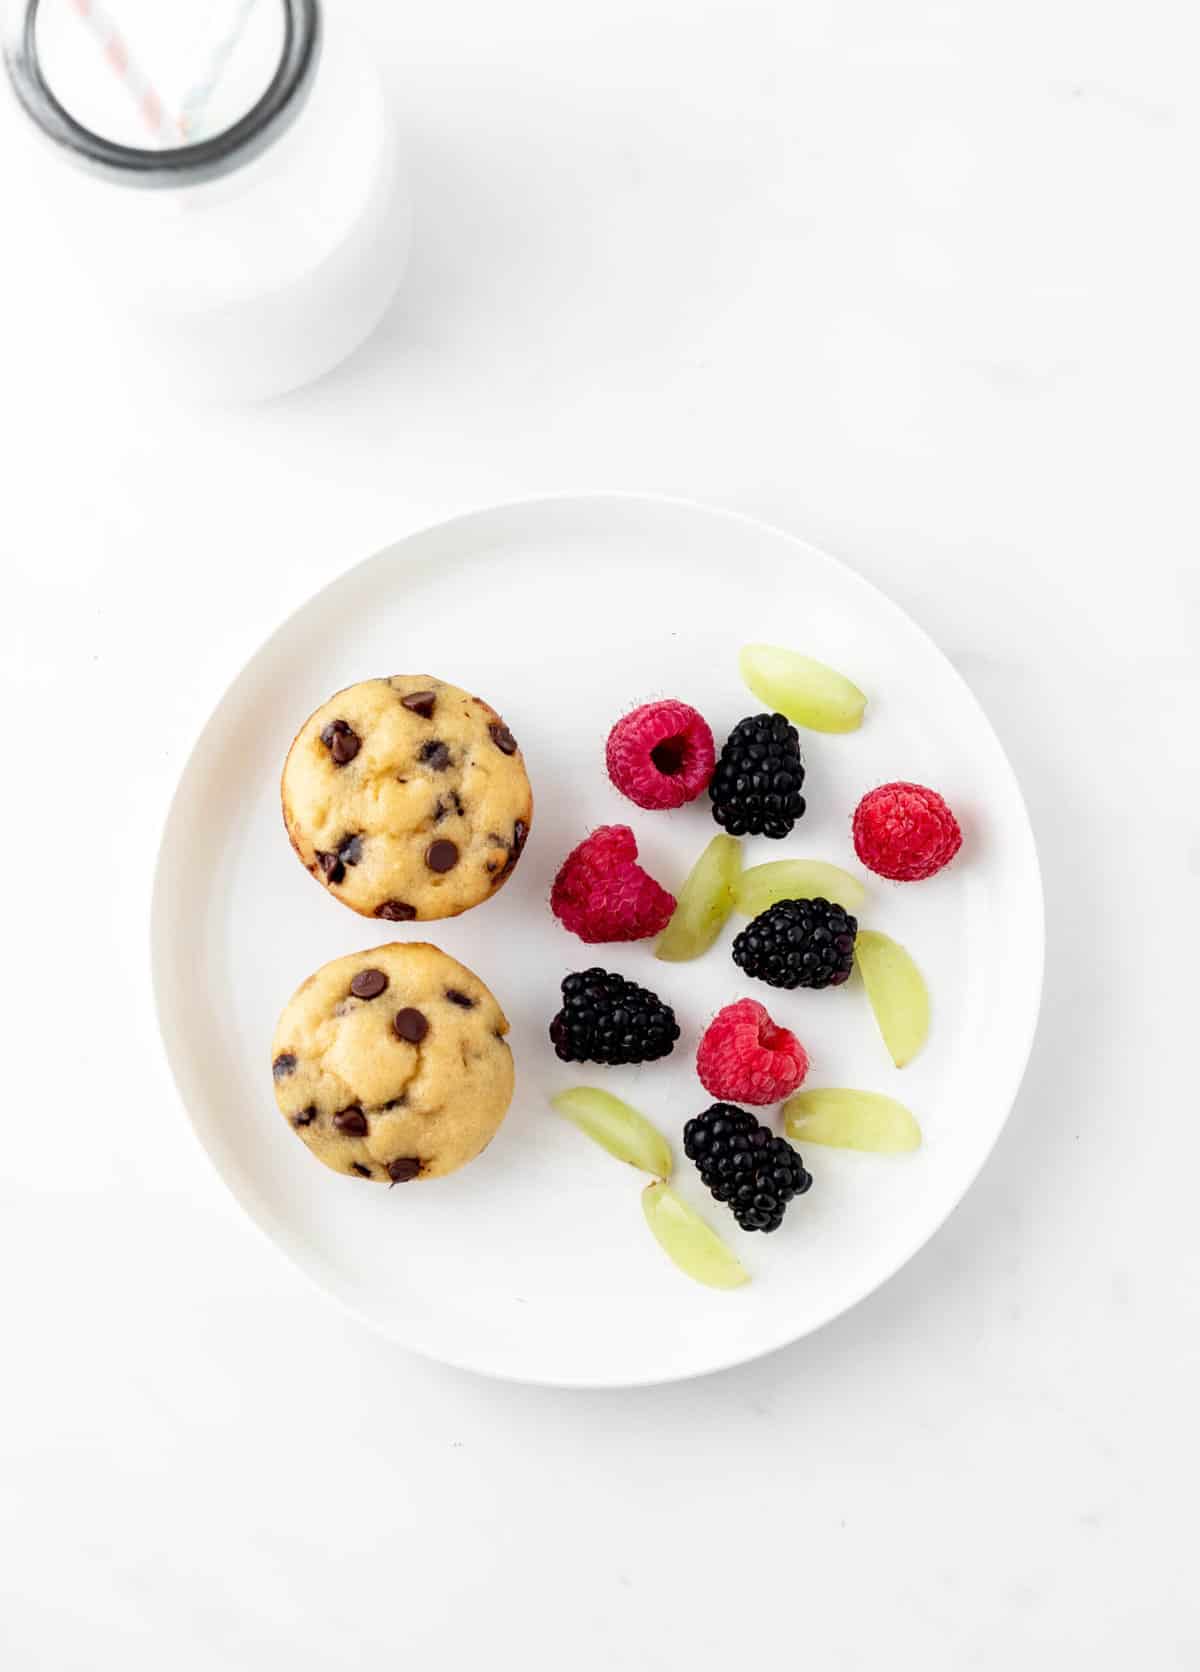 Mini chocolate chip muffins on a plate with fresh fruit.